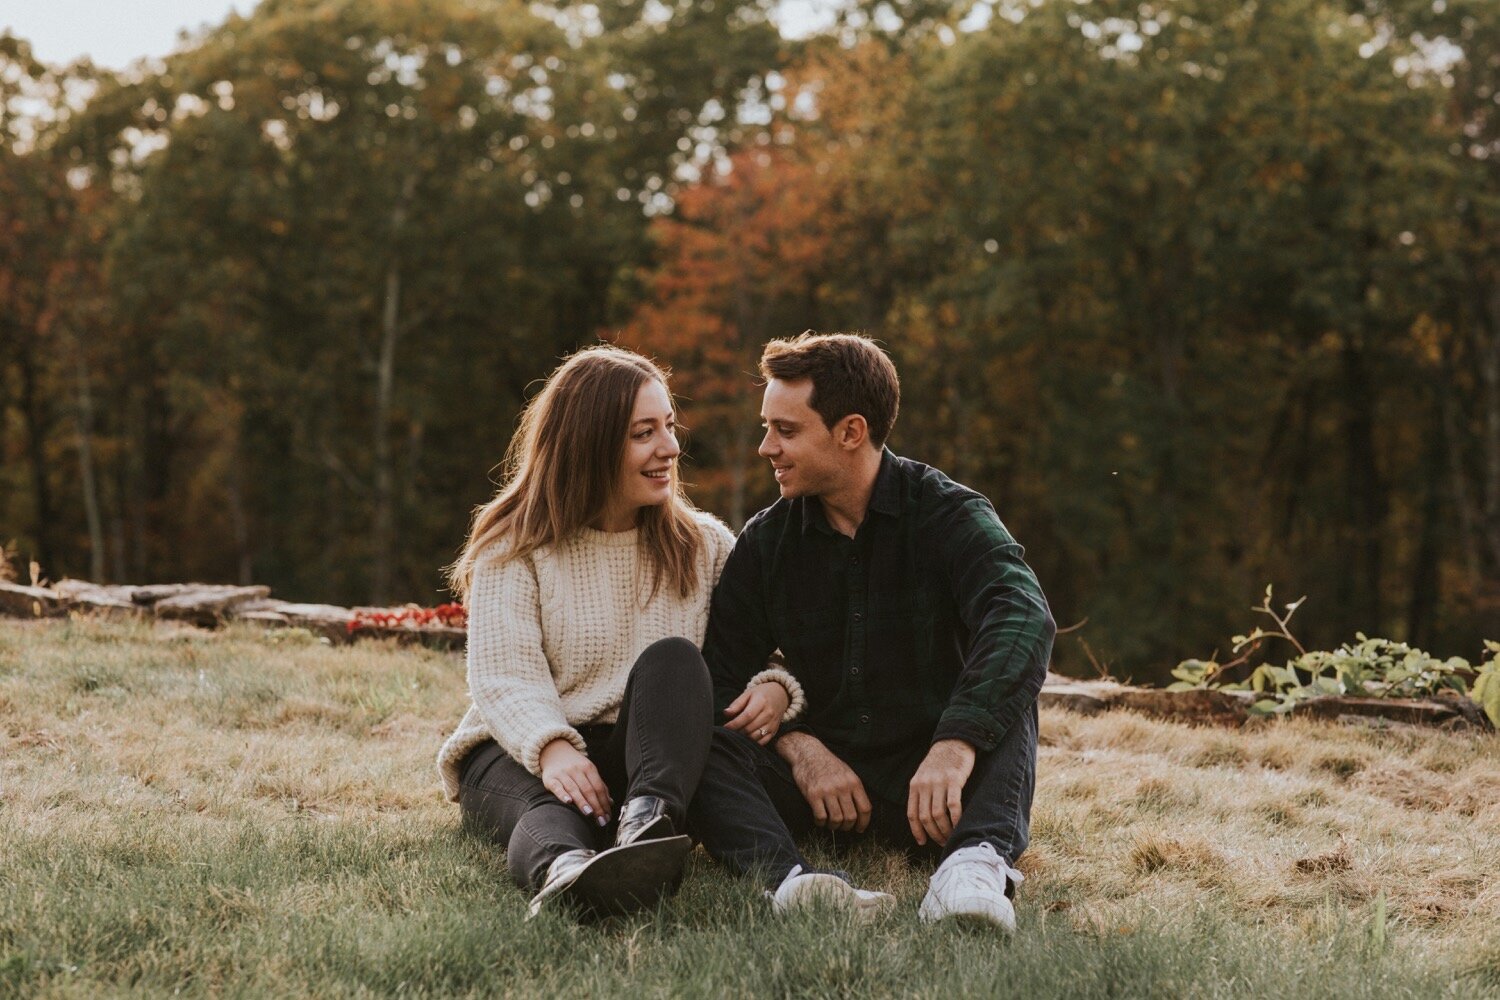 Hudson Valley Wedding Photographer, Hudson Valley Engagement Session, Connecticut Engagement Session